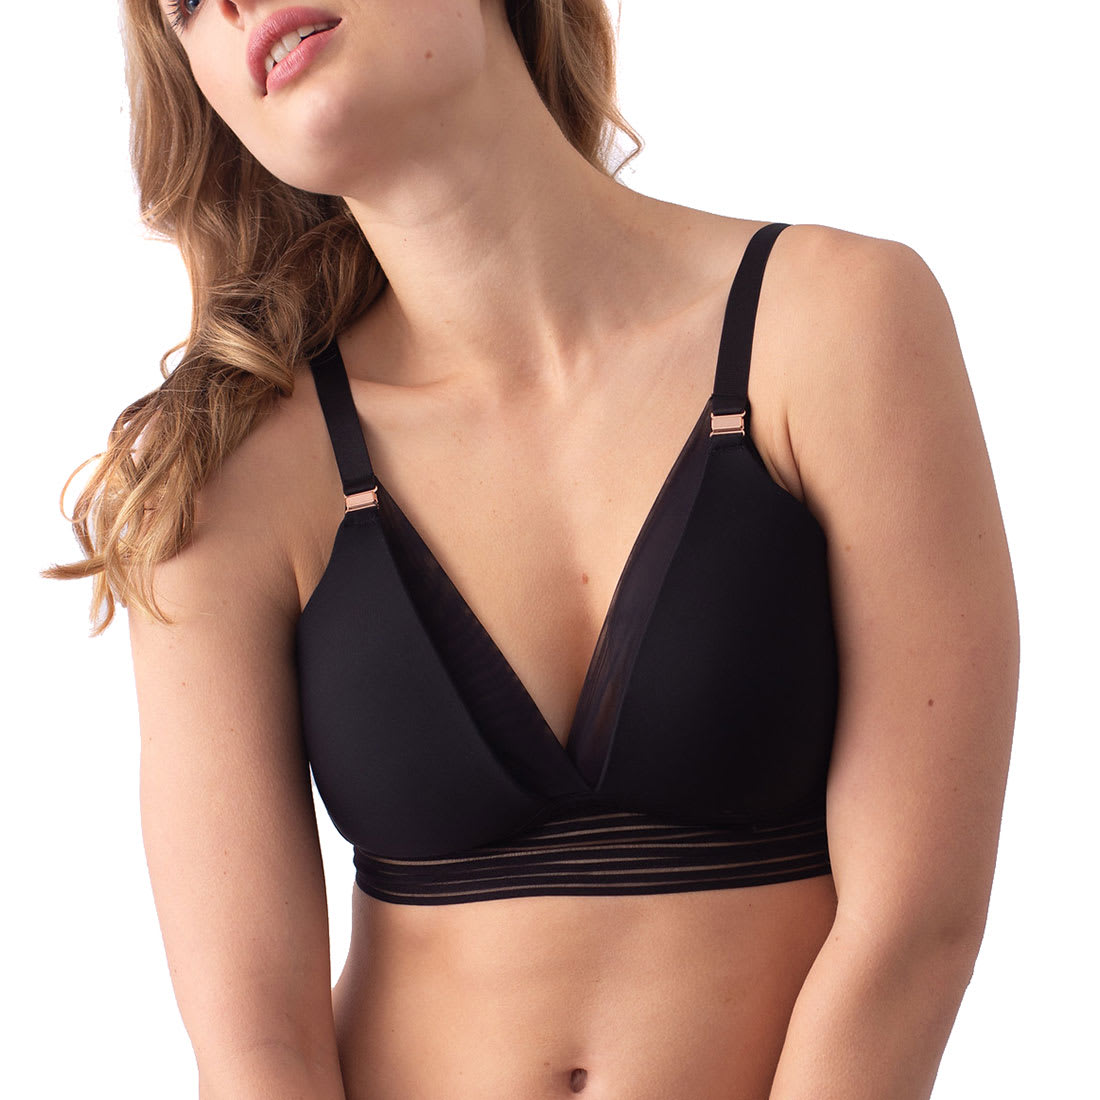 Project Me Ambition Triangle Wirefree Nursing Bra